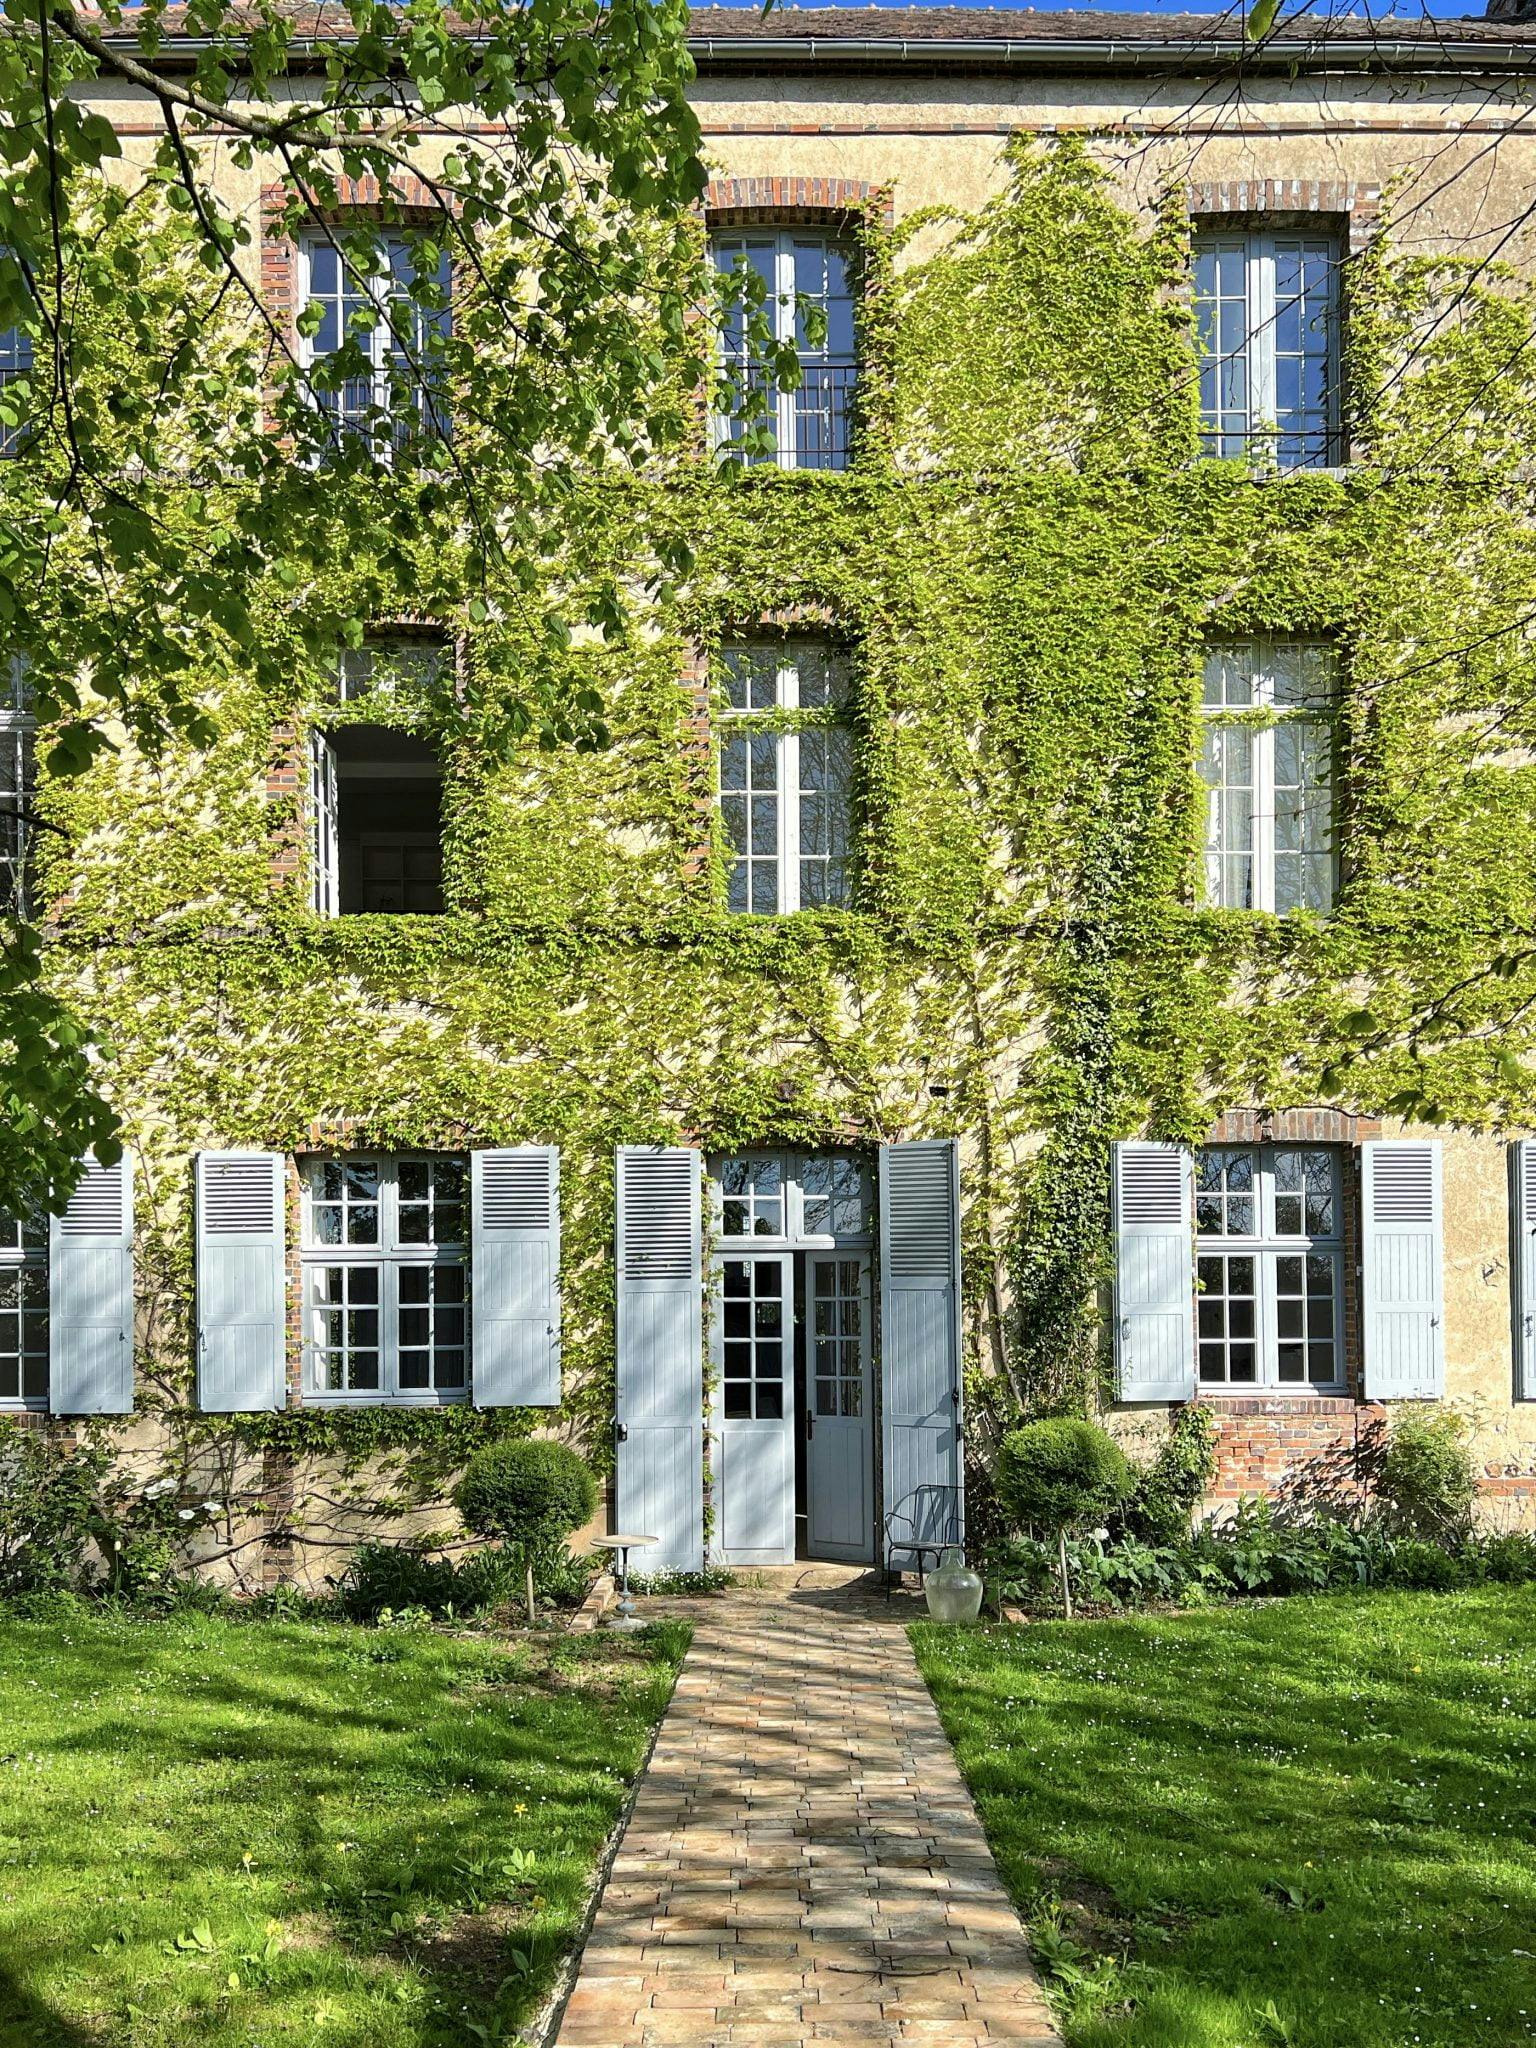 The facade of the Couvent des Ormes, lawn, sky blue shutters, and climbing ivy